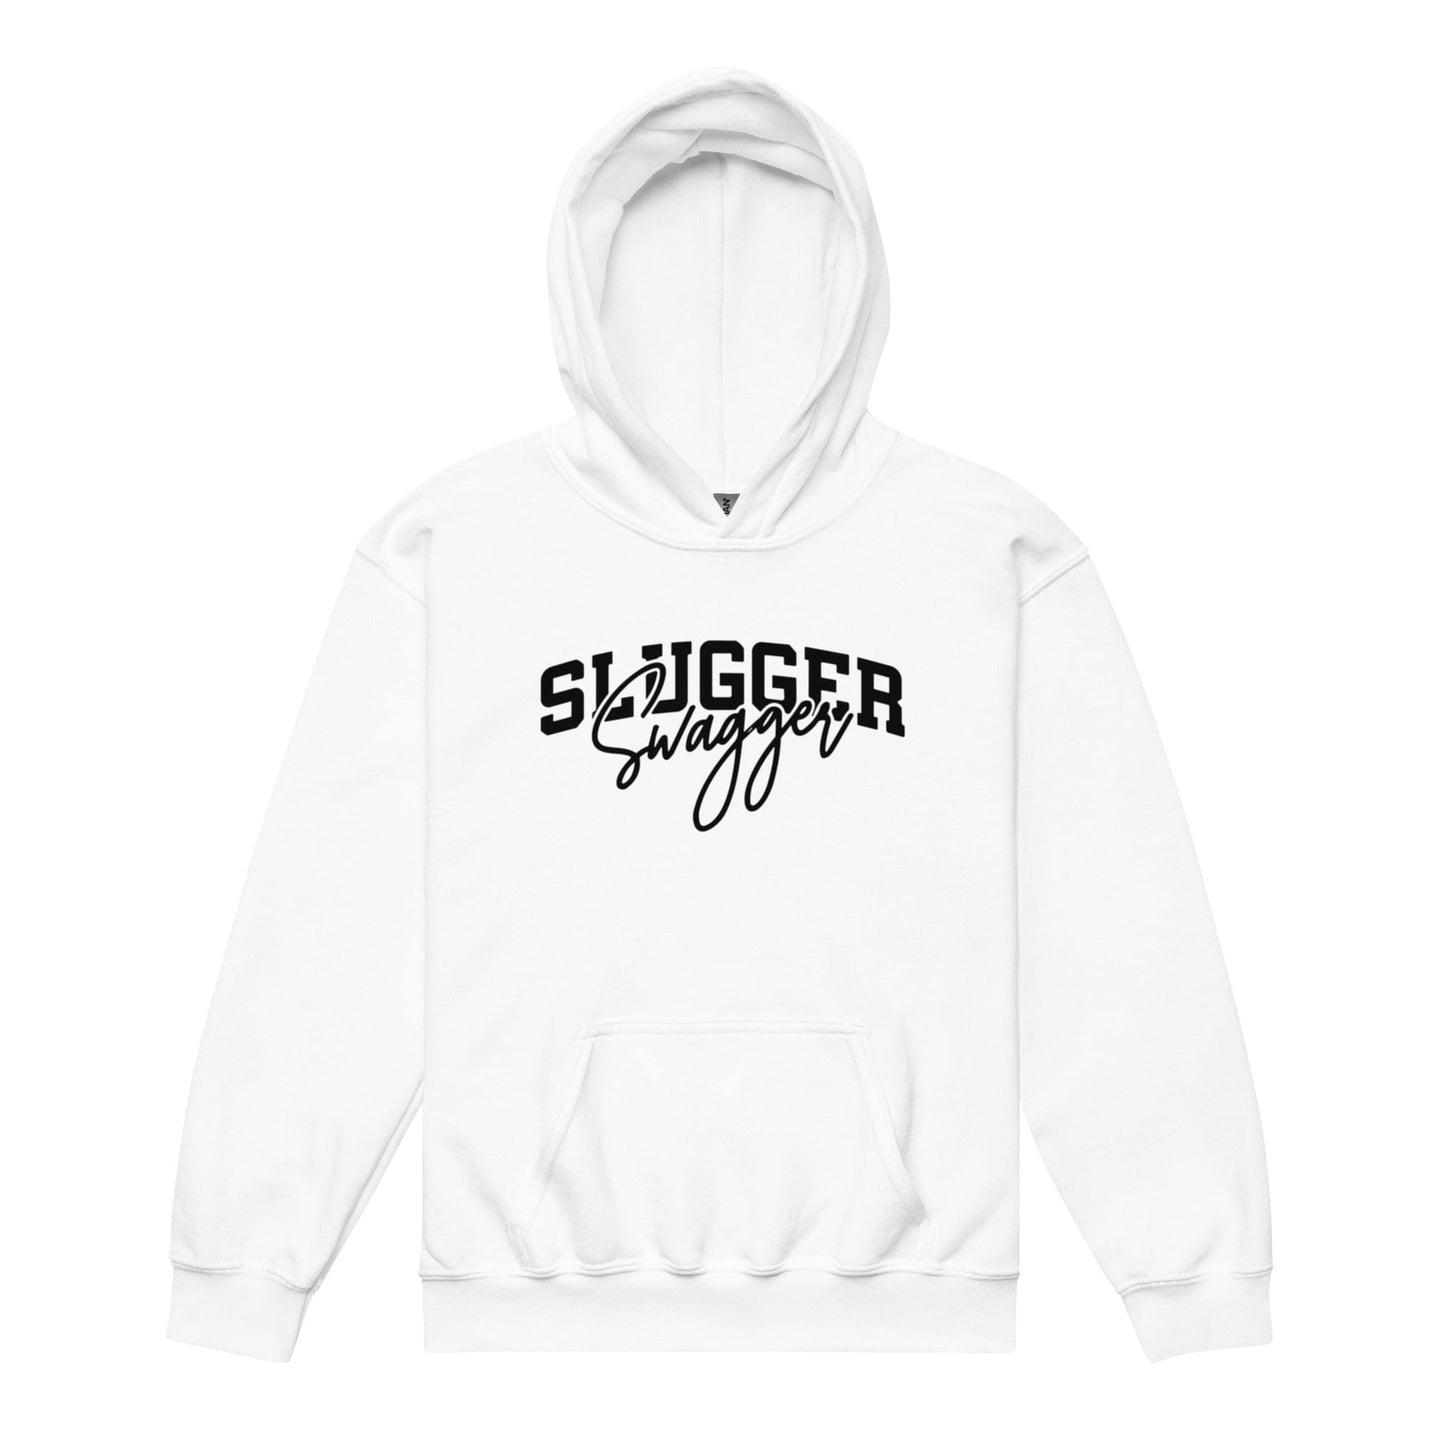 Slugger Swagger - Youth Hoodie